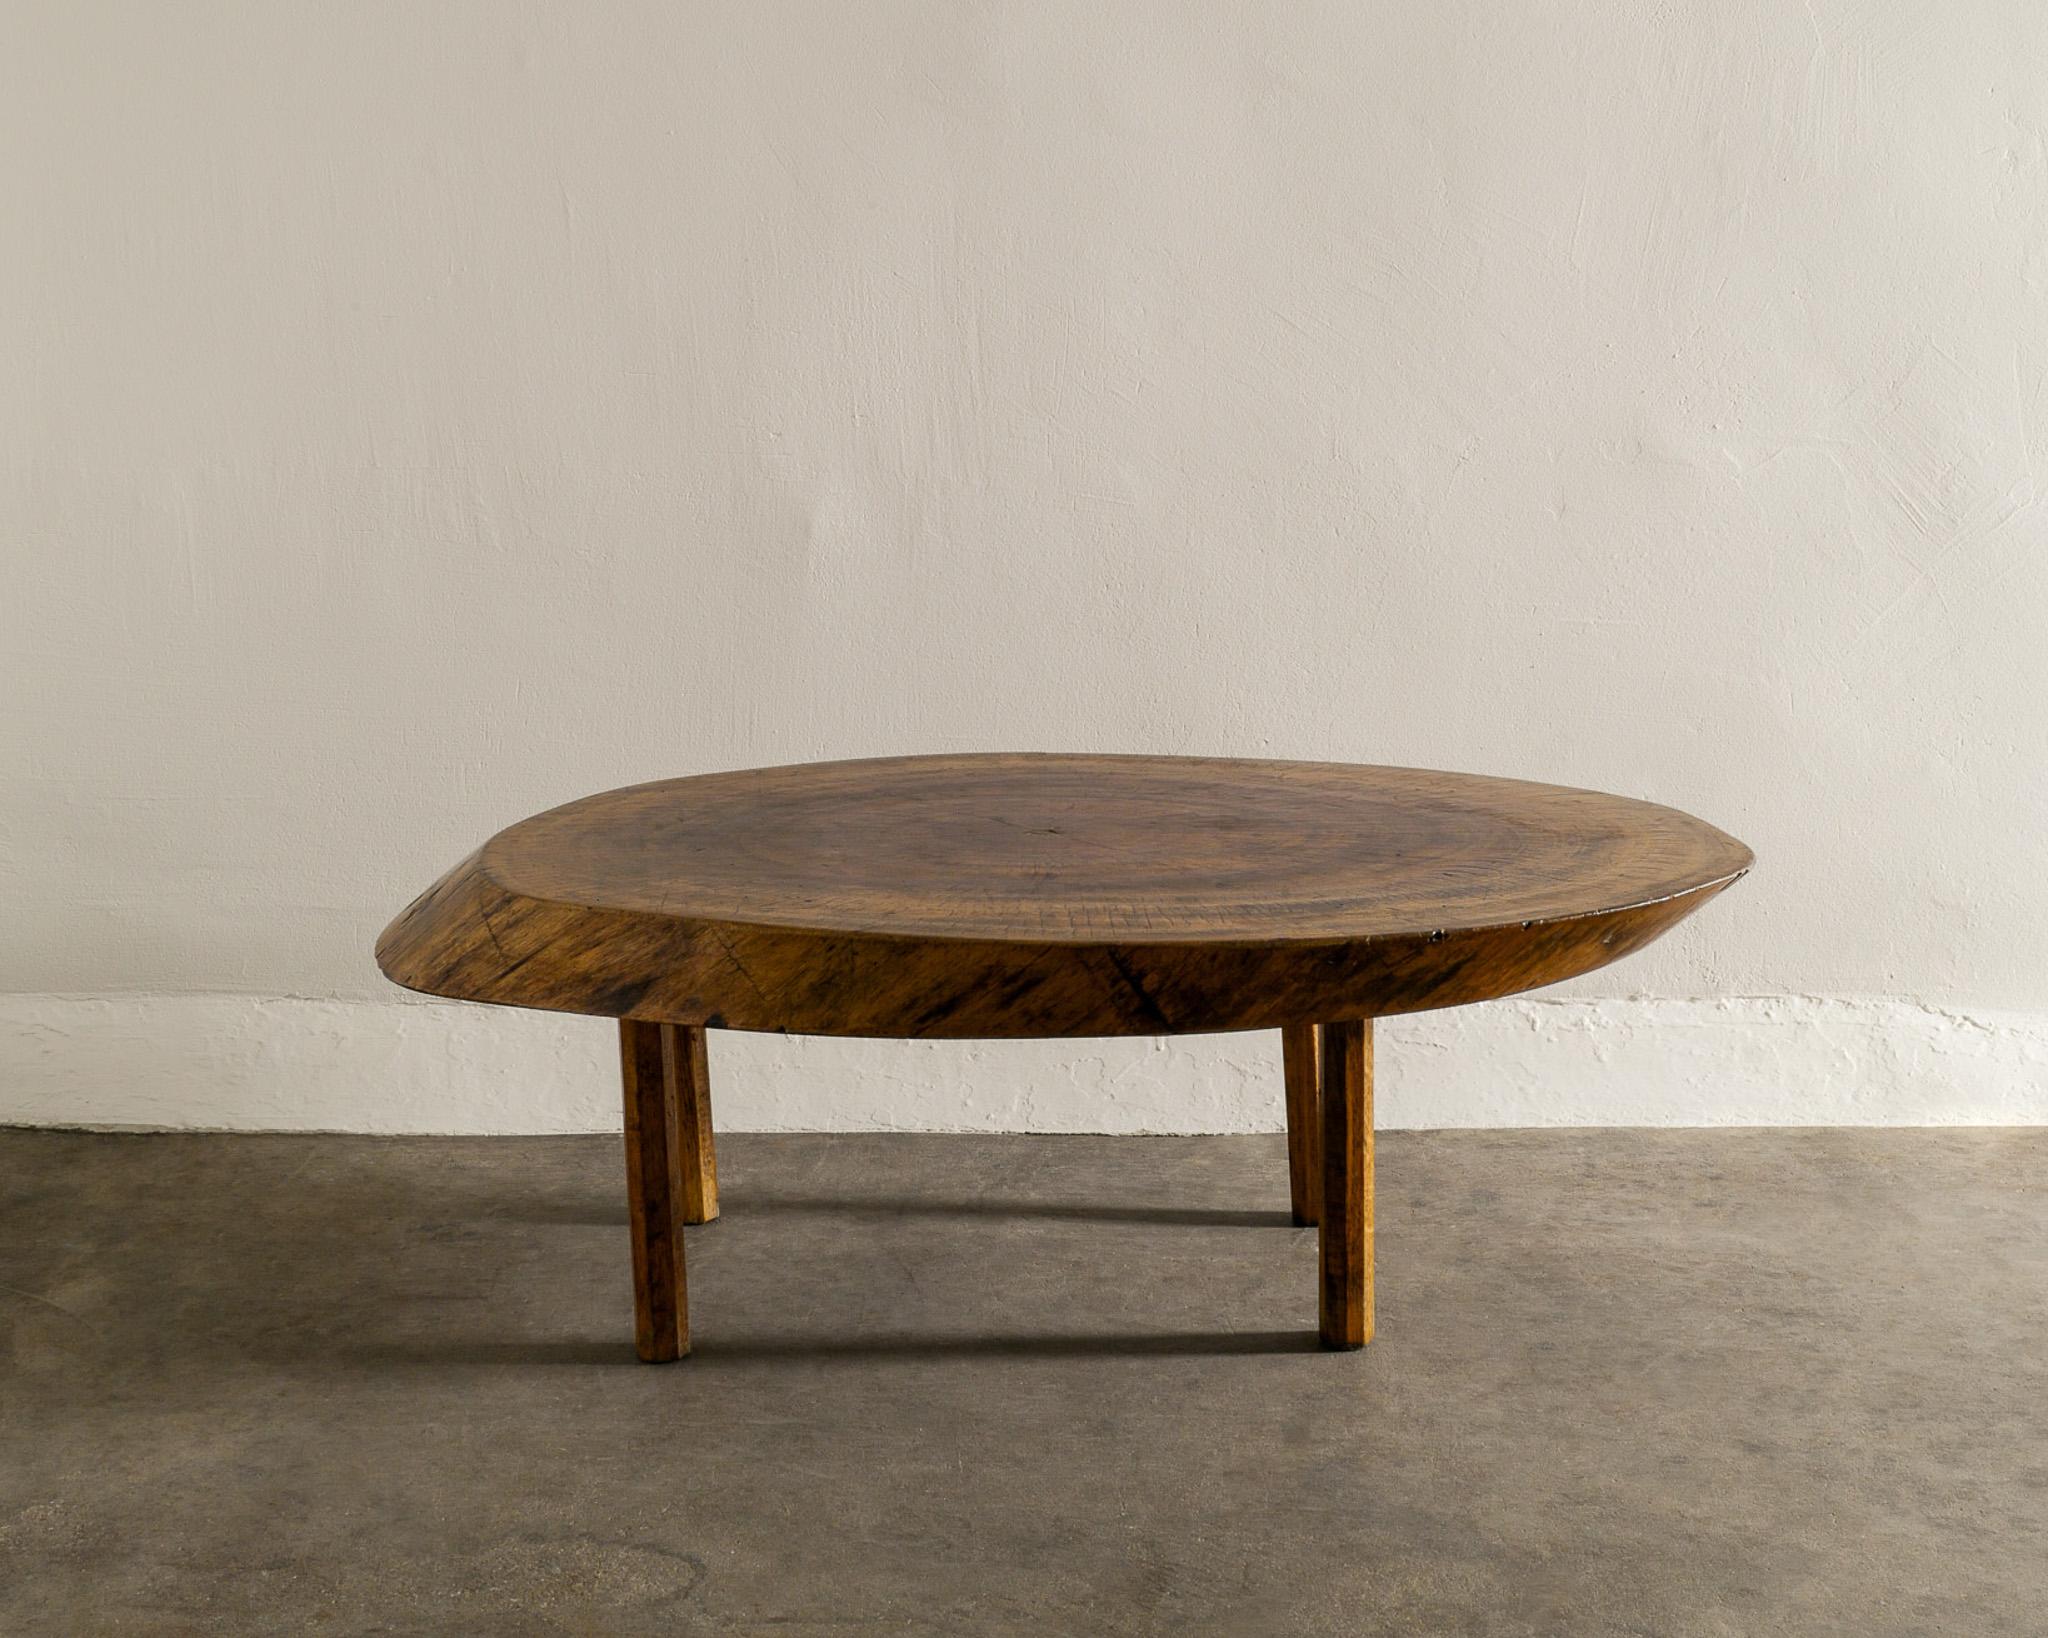 Rare and nice oval round French mid century coffee / low table in solid stained elm wood produced in France 1950s. Stable and in good original condition. 

Dimensions: H: 42 cm / 16.5